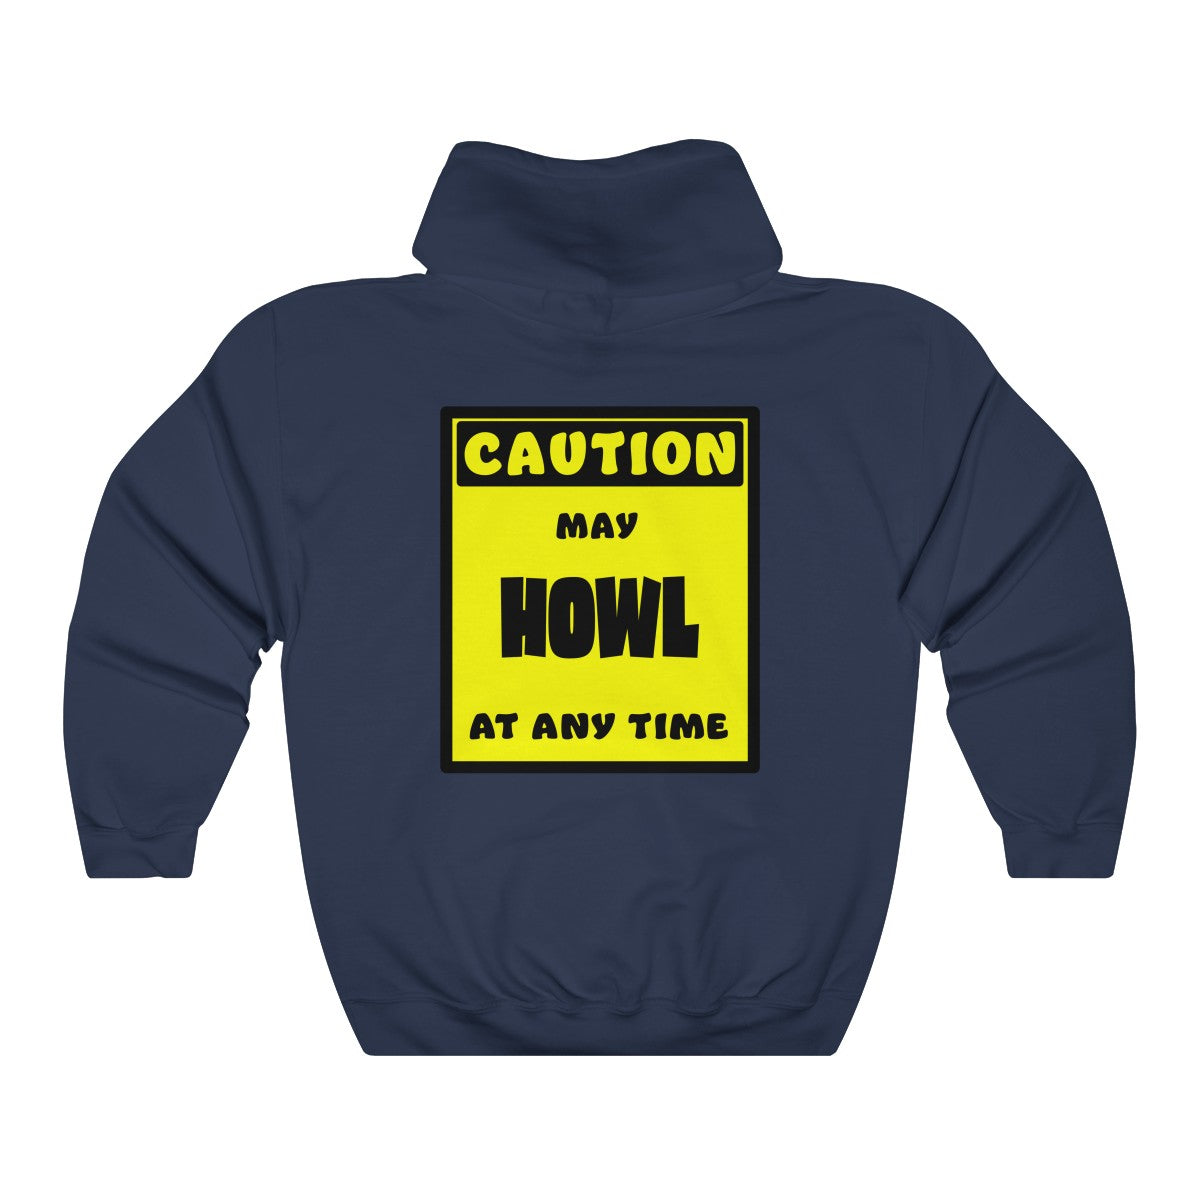 CAUTION! May HOWL at any time! - Hoodie Hoodie AFLT-Whootorca Navy Blue S 